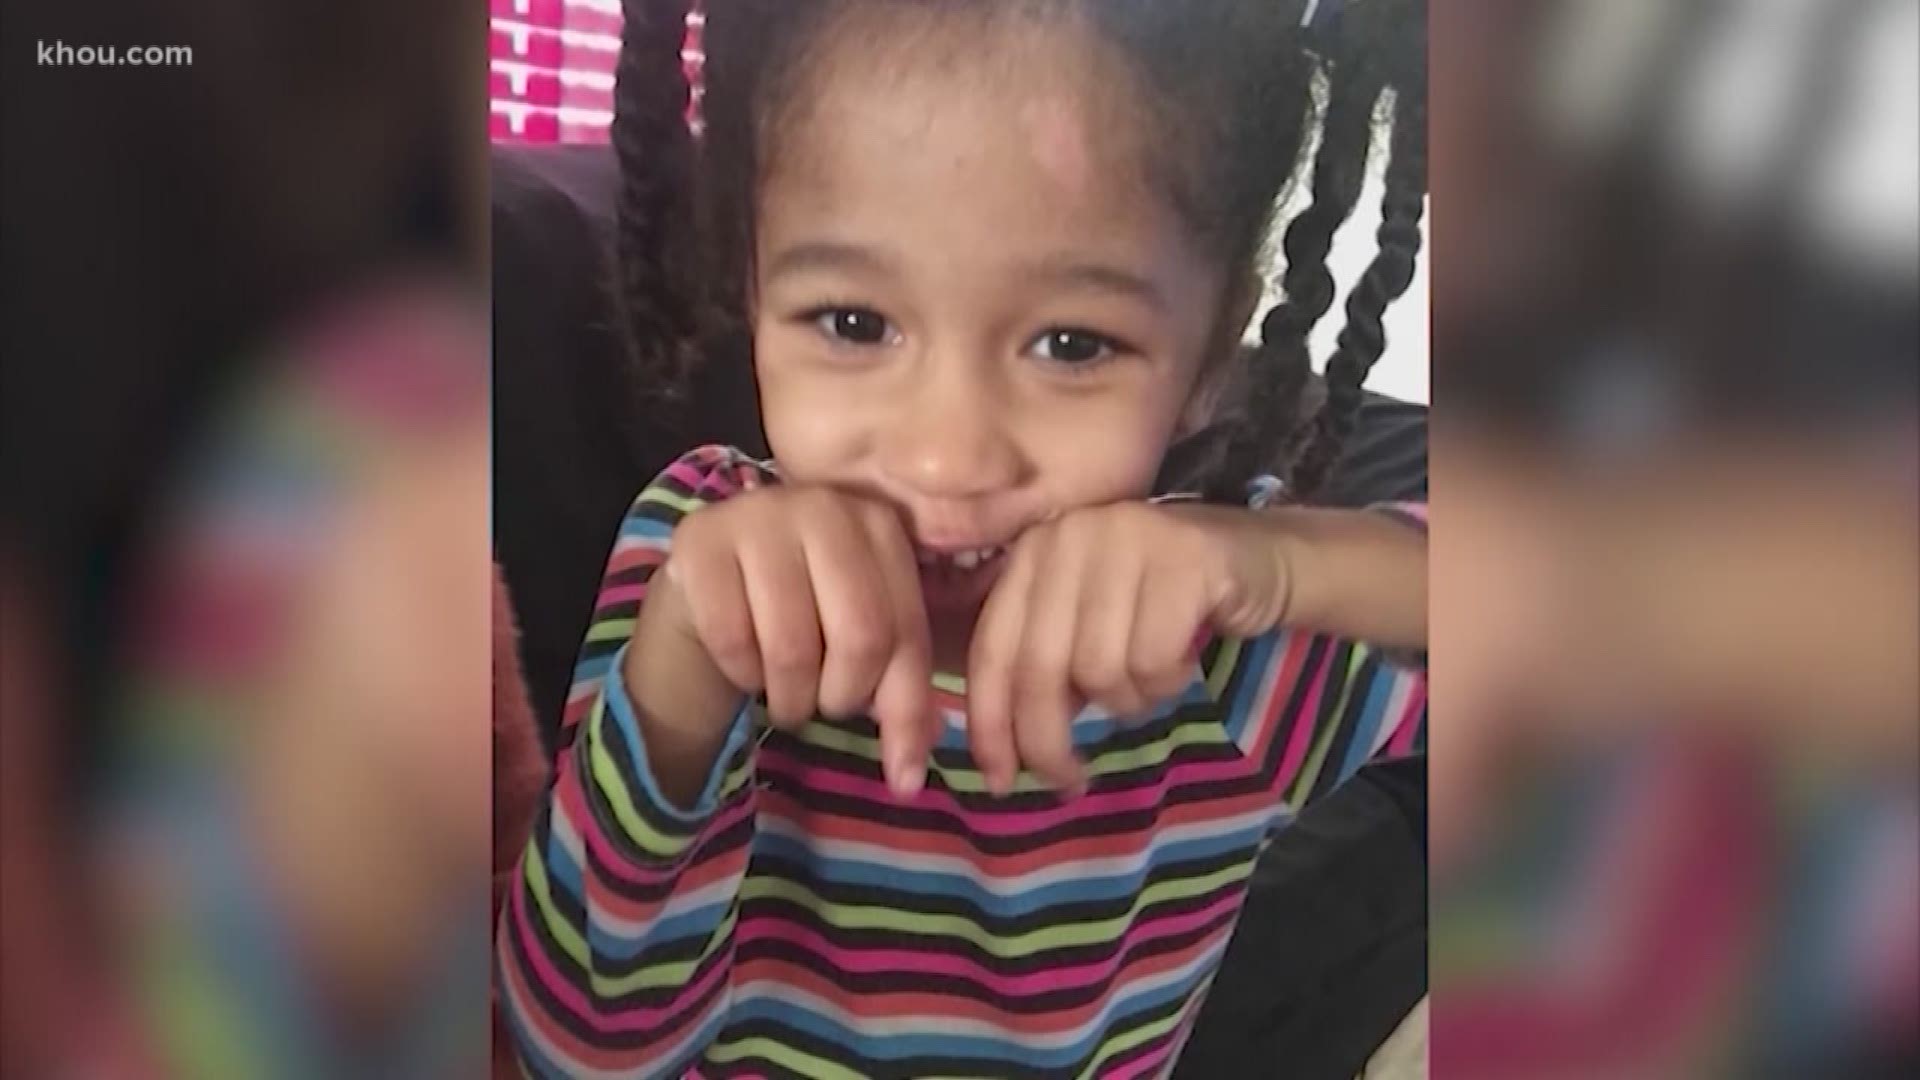 We're all waiting on the medical examiner to give the final word on whether the body of a child found in Arkansas was Maleah Davis. The body has not been formally identified. But the head of Texas Equusearch says he's sure it is Maleah.